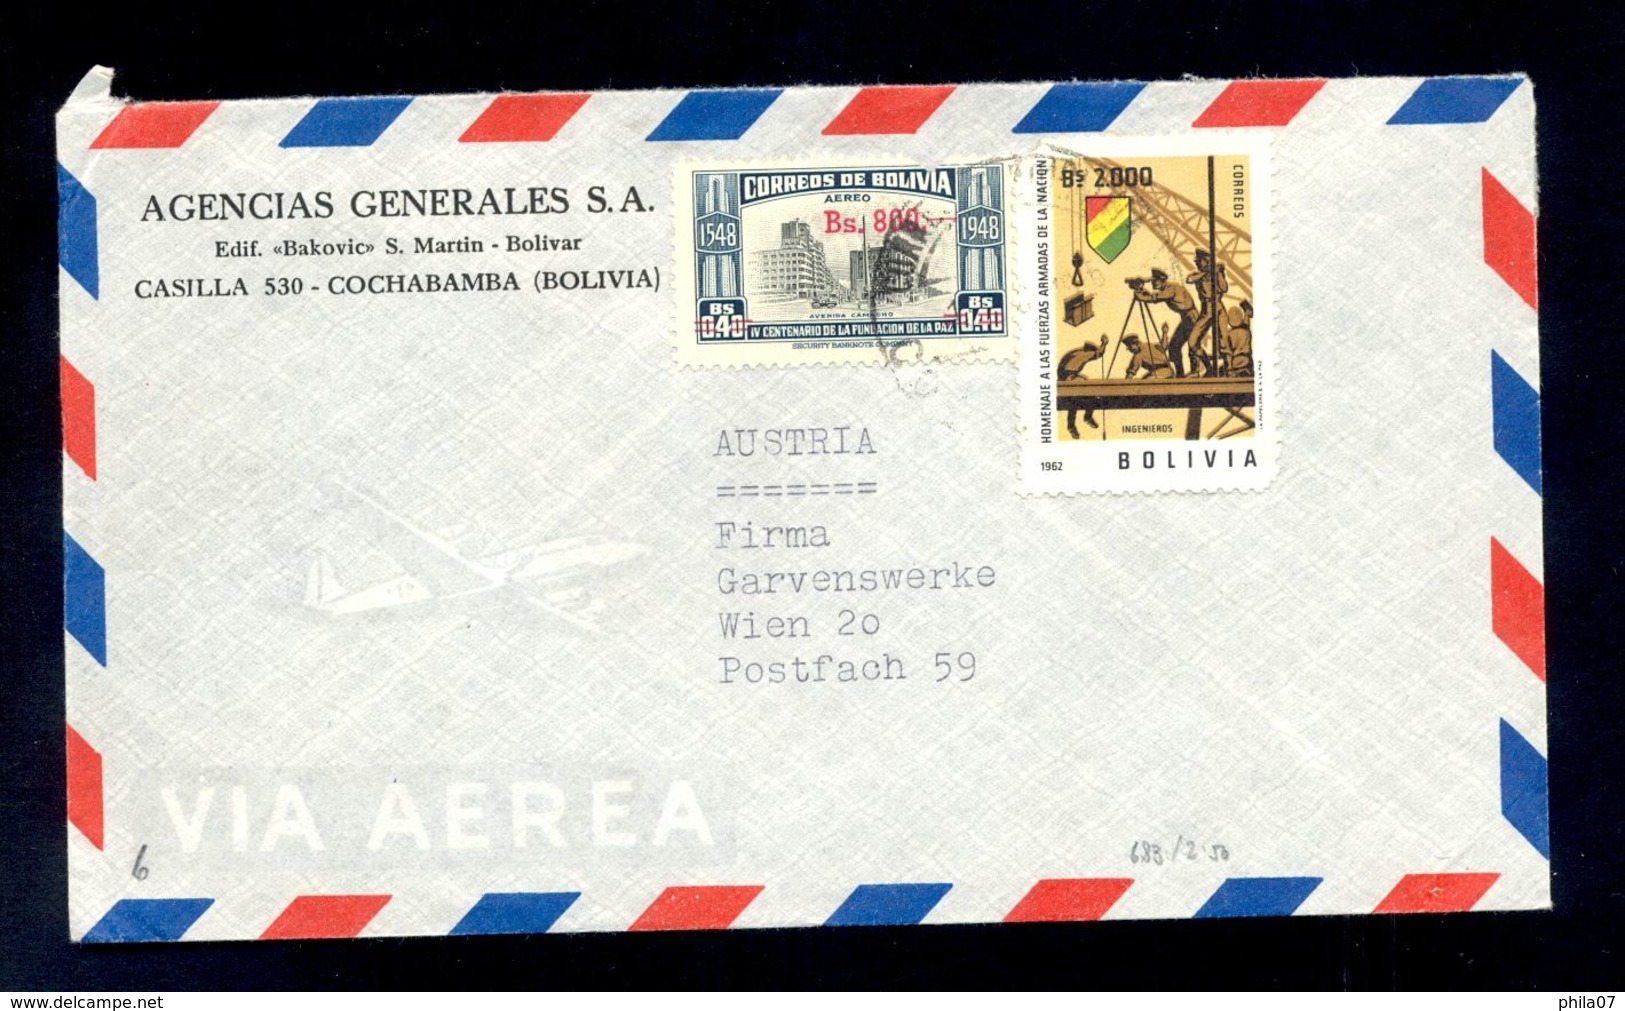 BOLIVIA - Envelope For Air Mail Sent From Bolivia To Wien/Austria. Nice Two Colored Franking. - Bolivia